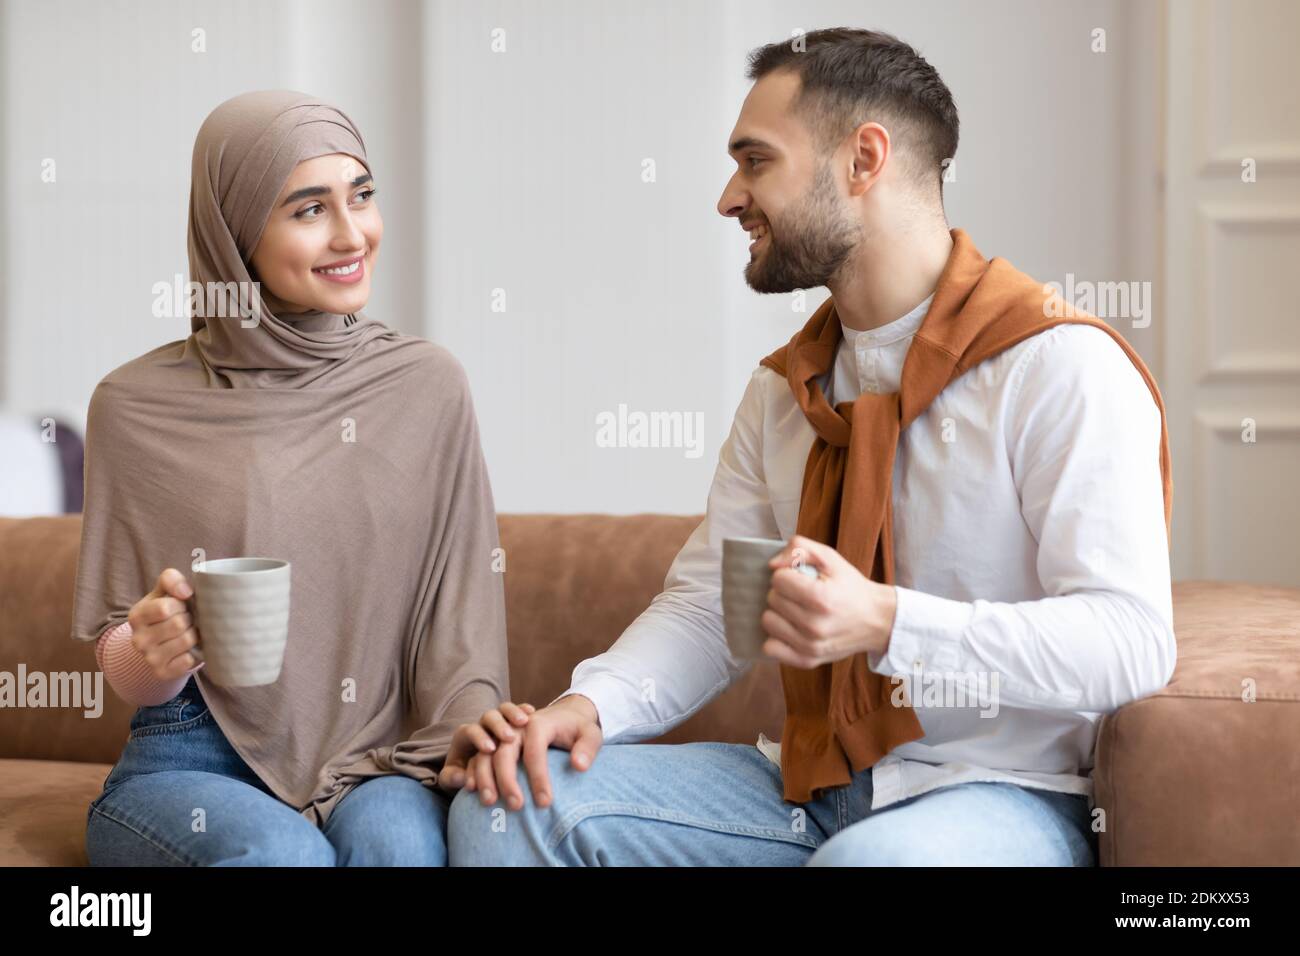 Young Muslim Couple Talking And Flirting Drinking Coffee At Home Stock Photo